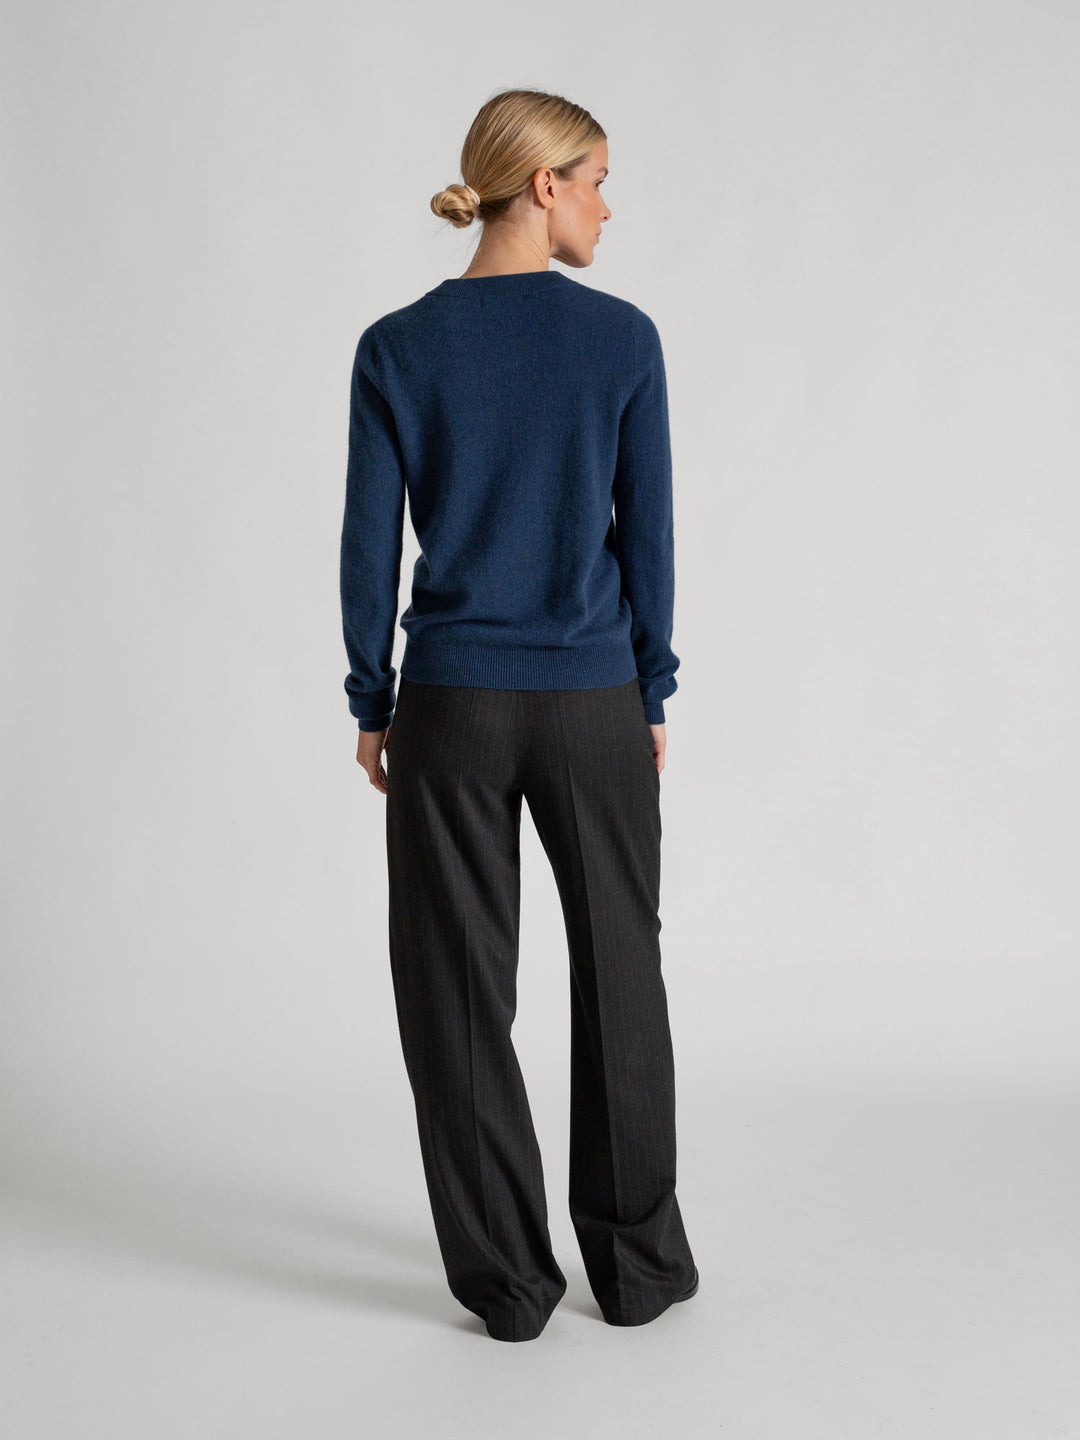 Cashmere sweater "Thora" in 100% pure cashmere. Long sleeves, round neck. Scandinavian design by Kashmina. Color: Mountain Blue.